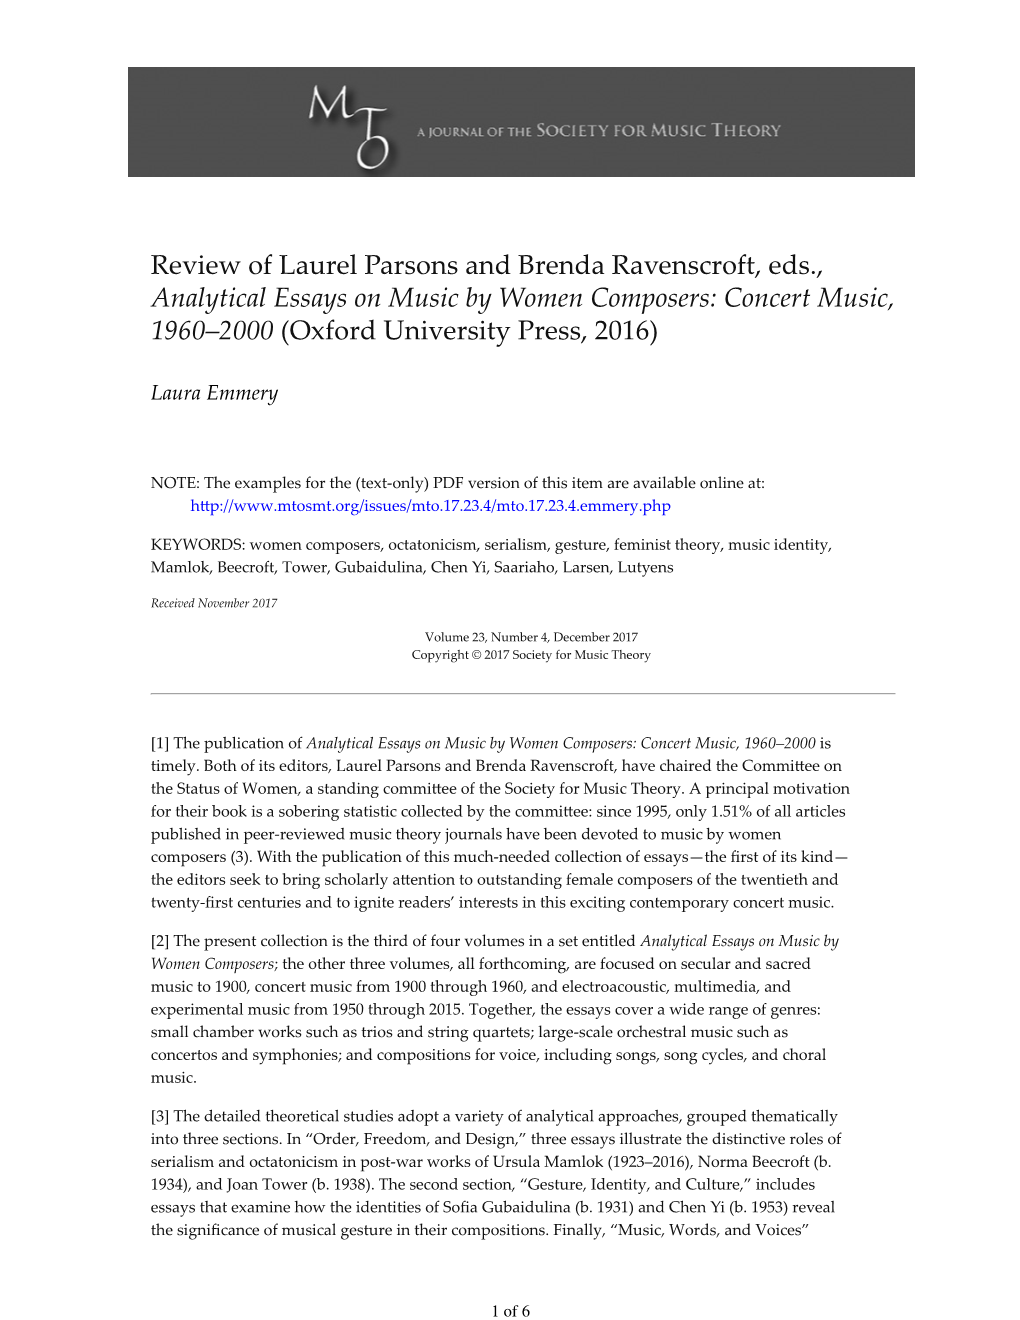 MTO 23.4: Emmery, Review of Parsons and Ravenscroft